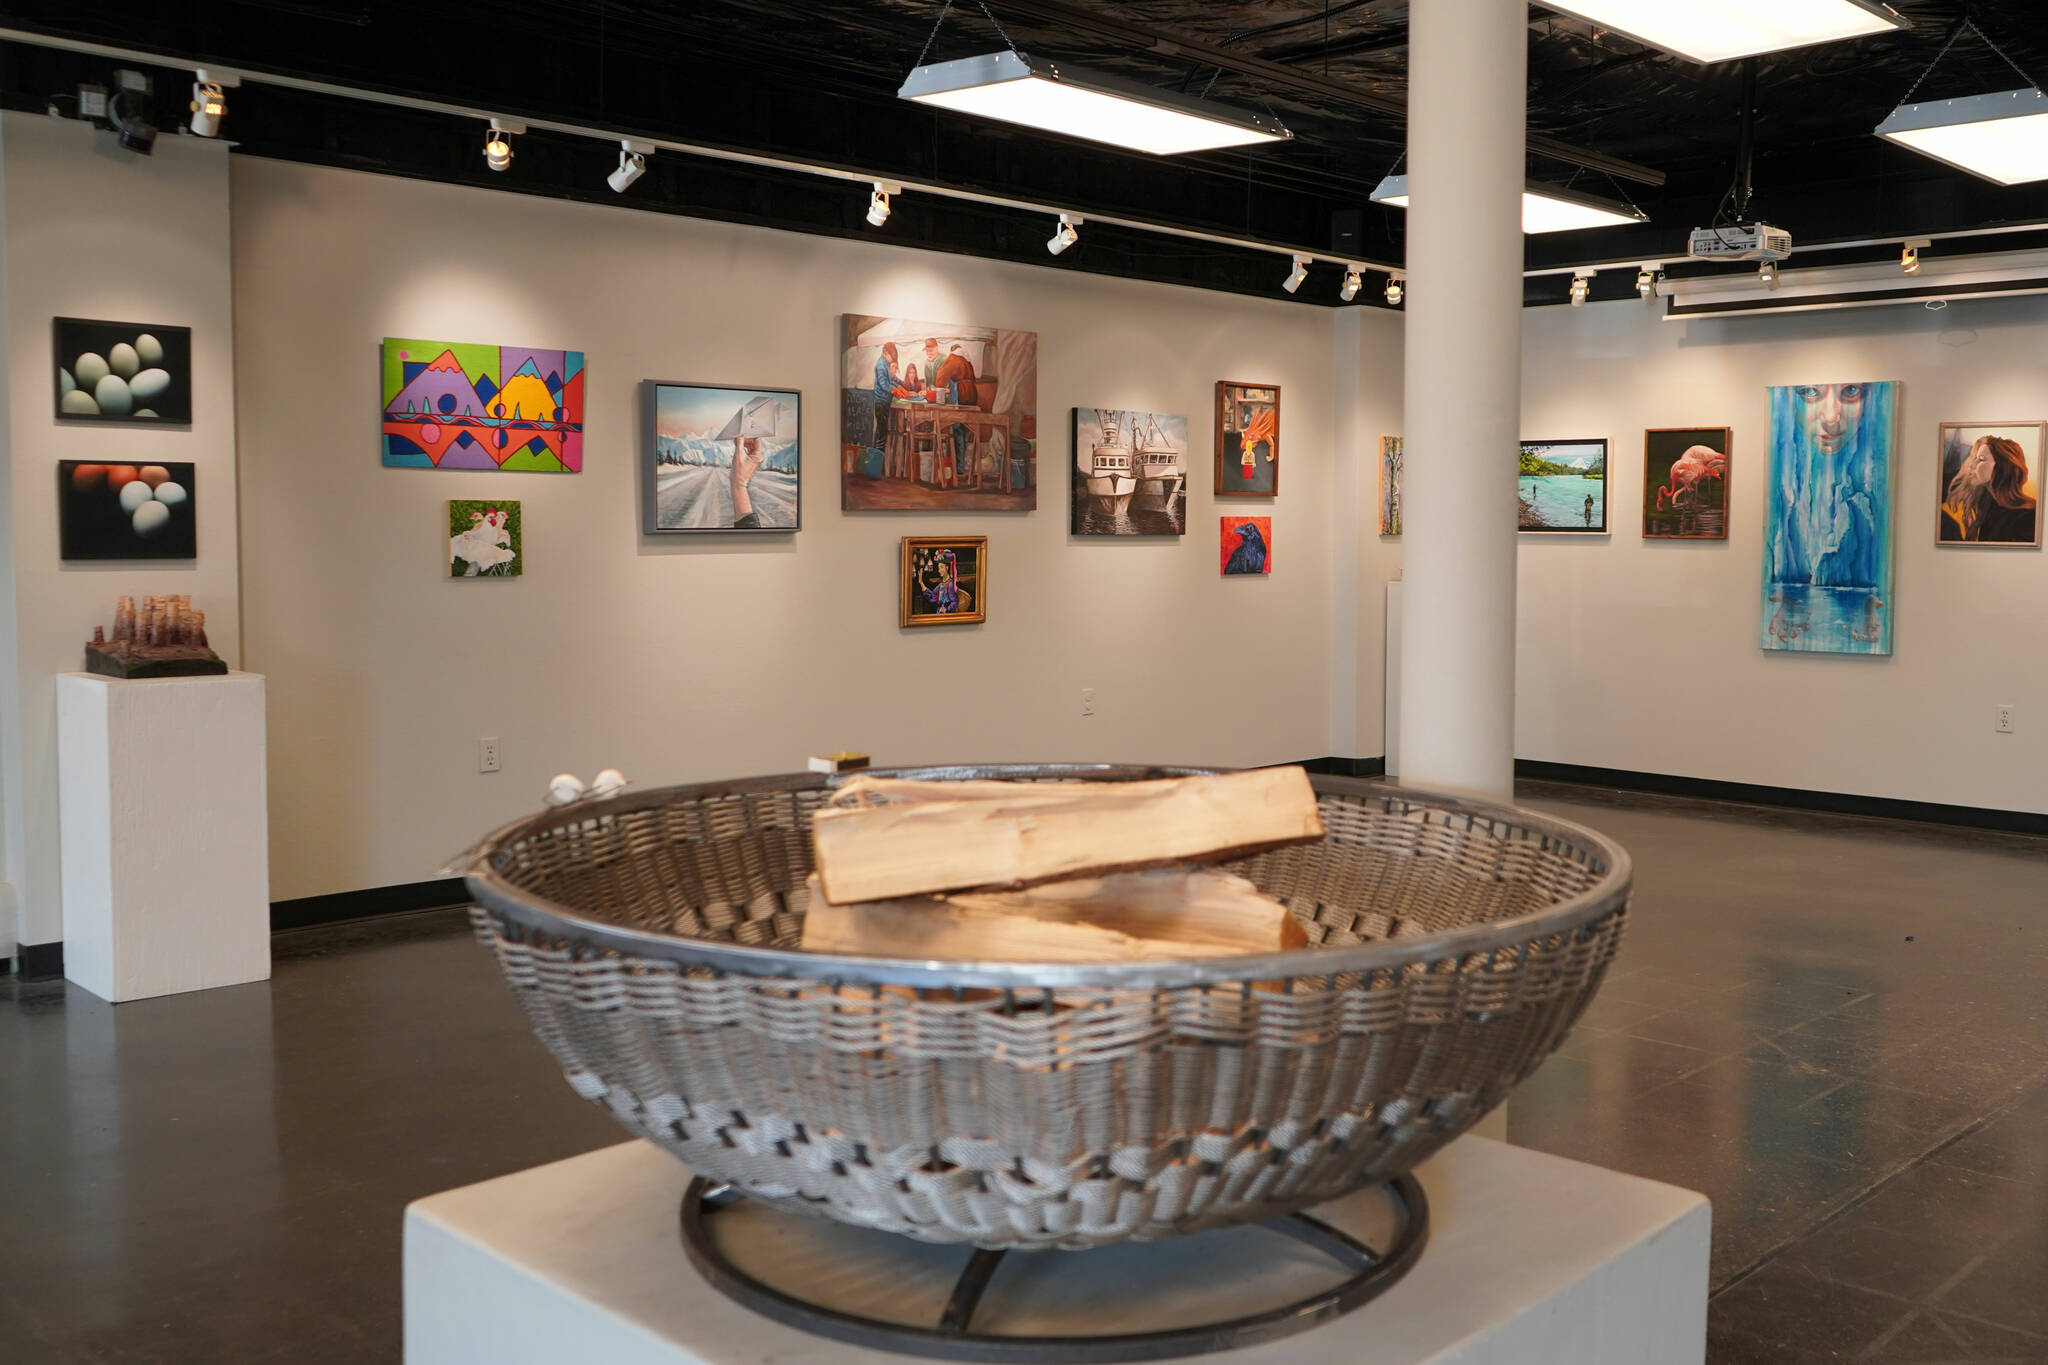 A fire pit crafted by C.O. Rudstrom stands at the center of the gallery, in front of several other pieces included in the Biennial Judged Show at the Kenai Art Center in Kenai, Alaska, on Wednesday, Oct. 4, 2023. (Jake Dye/Peninsula Clarion)